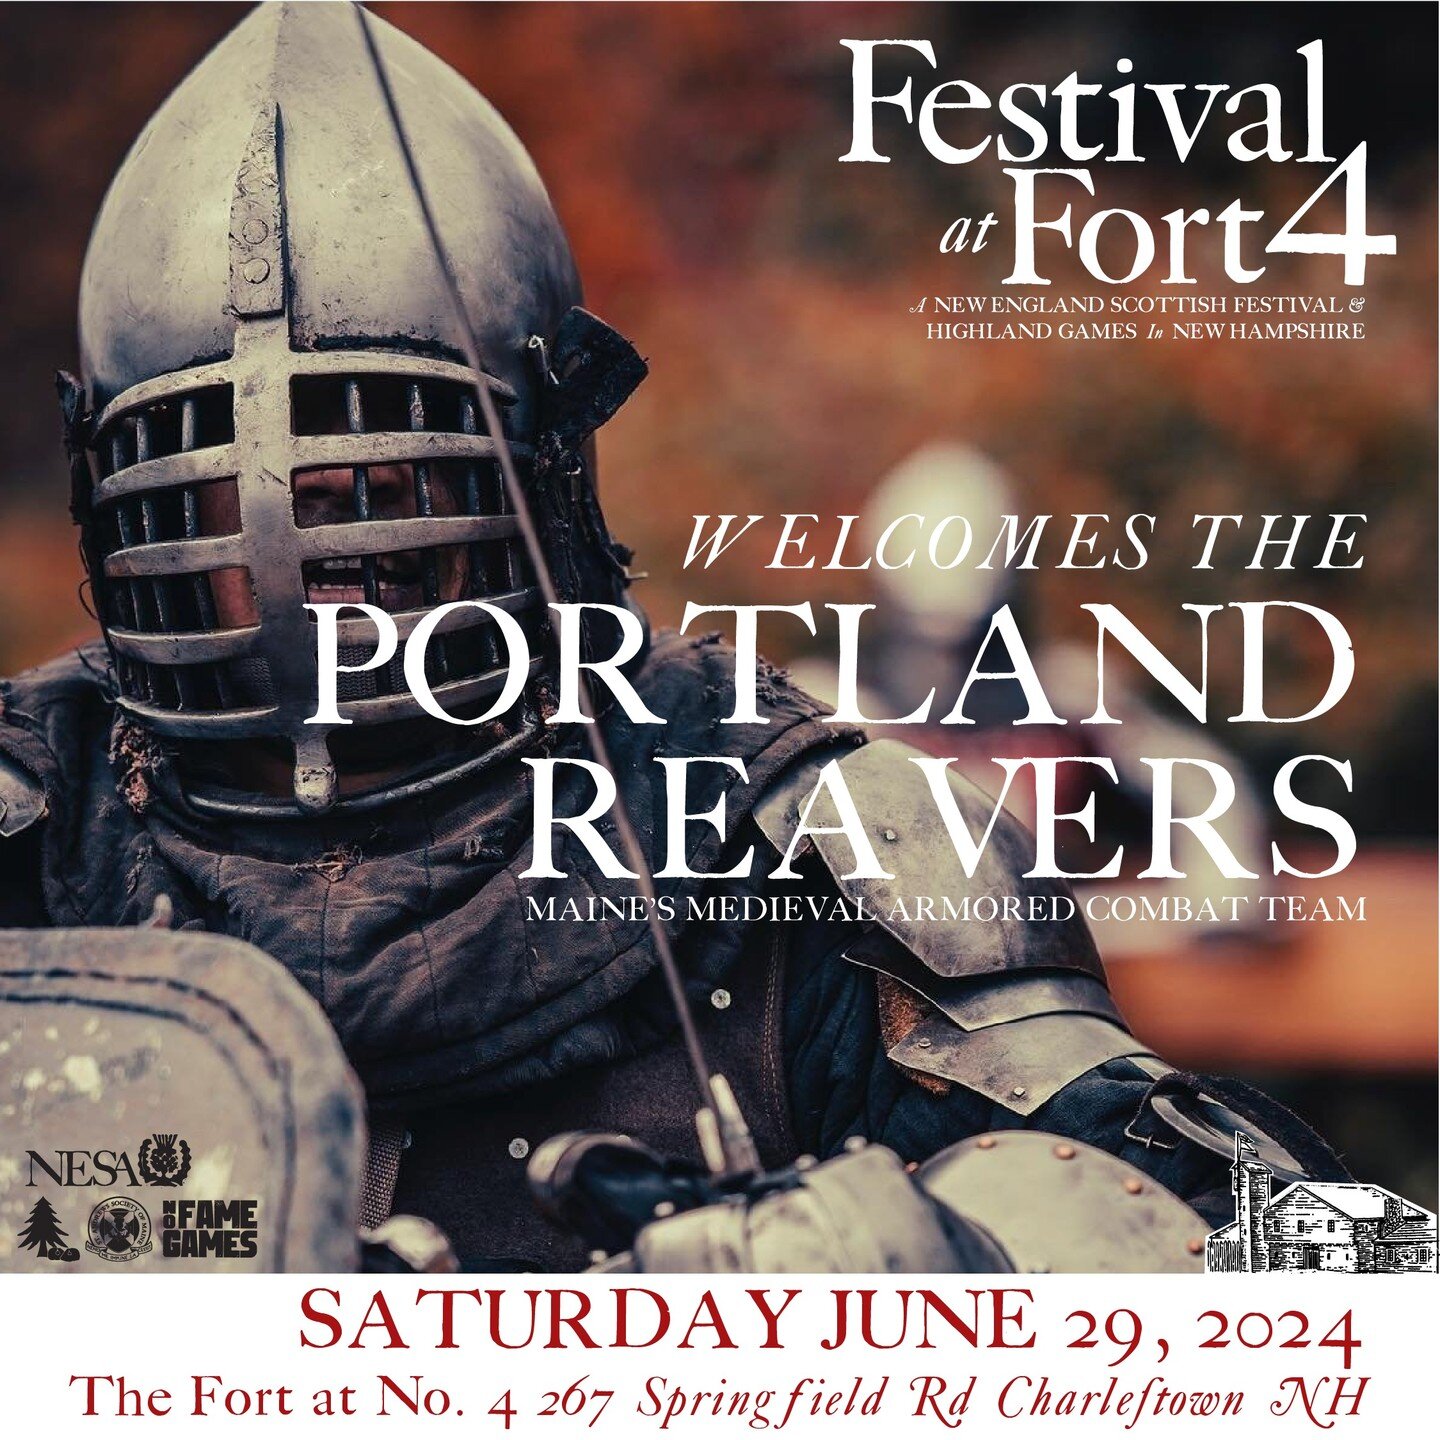 The Festival at Fort 4 is pleased to welcome The Portland Reavers, Maine's Medieval Armored Combat Team! 
Come see men in full armor swing swords and battle like the knights of old!
#Buhurt #highlandgames #festivalatfort4 #stonelifting #pipesanddrums